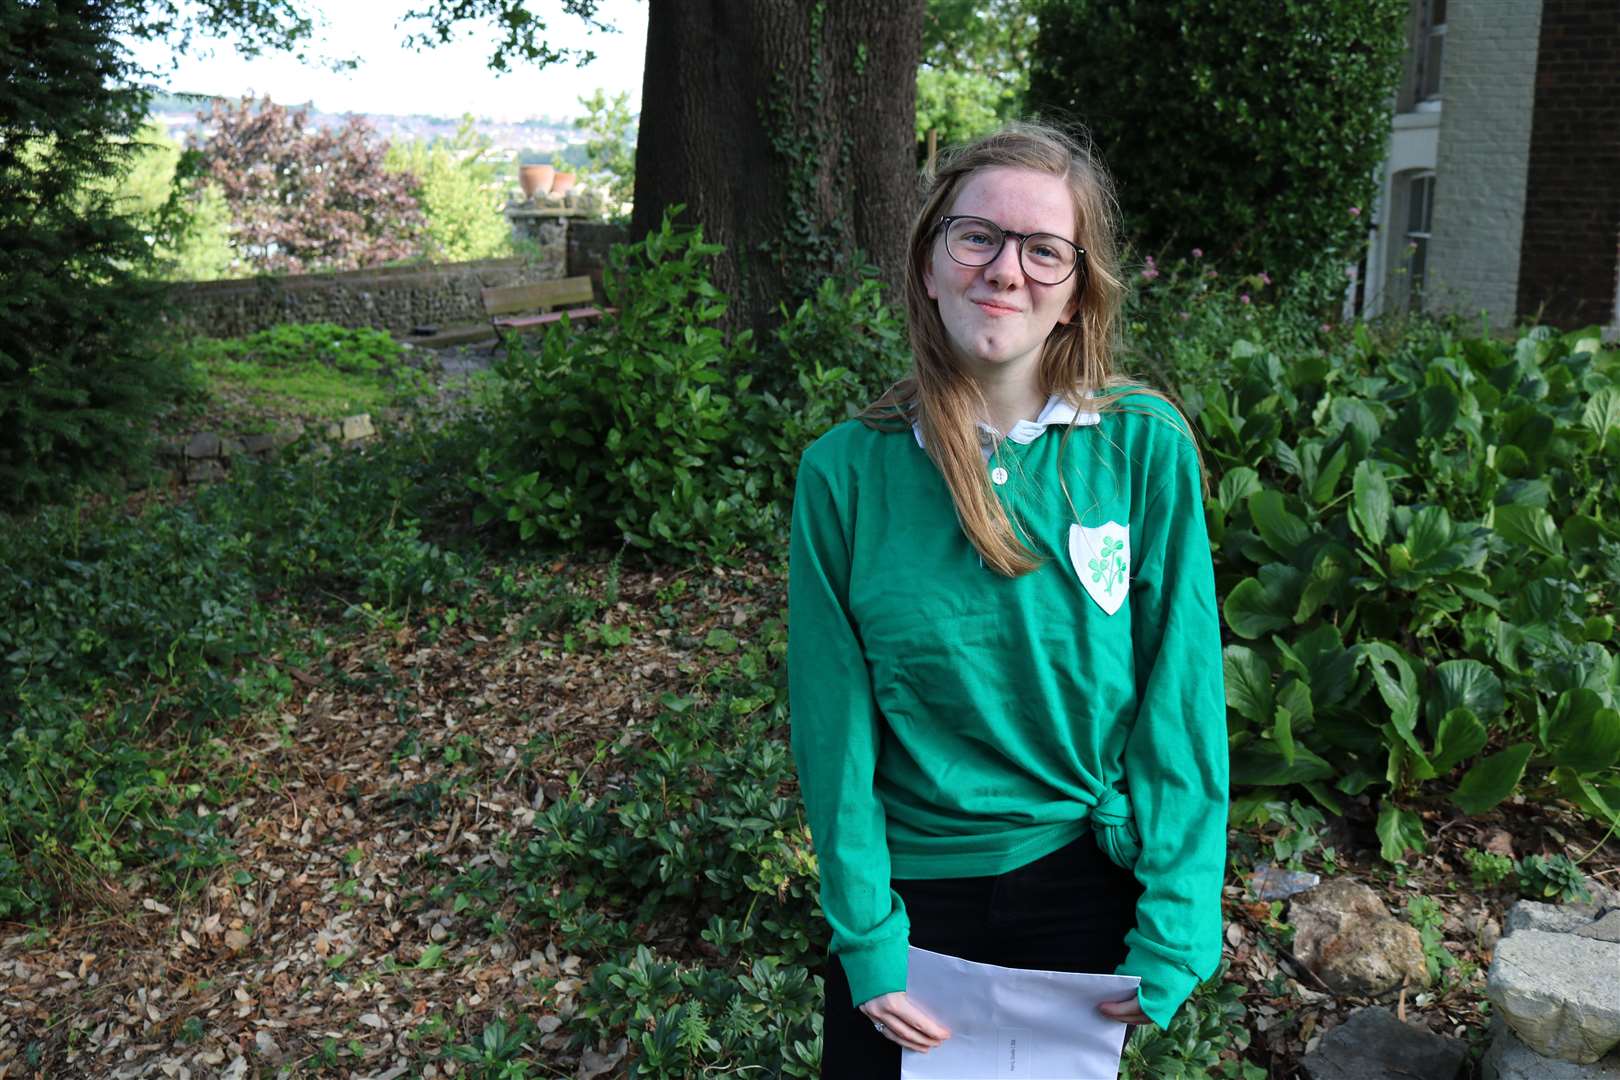 Giselle Harris is going to Magdalen College